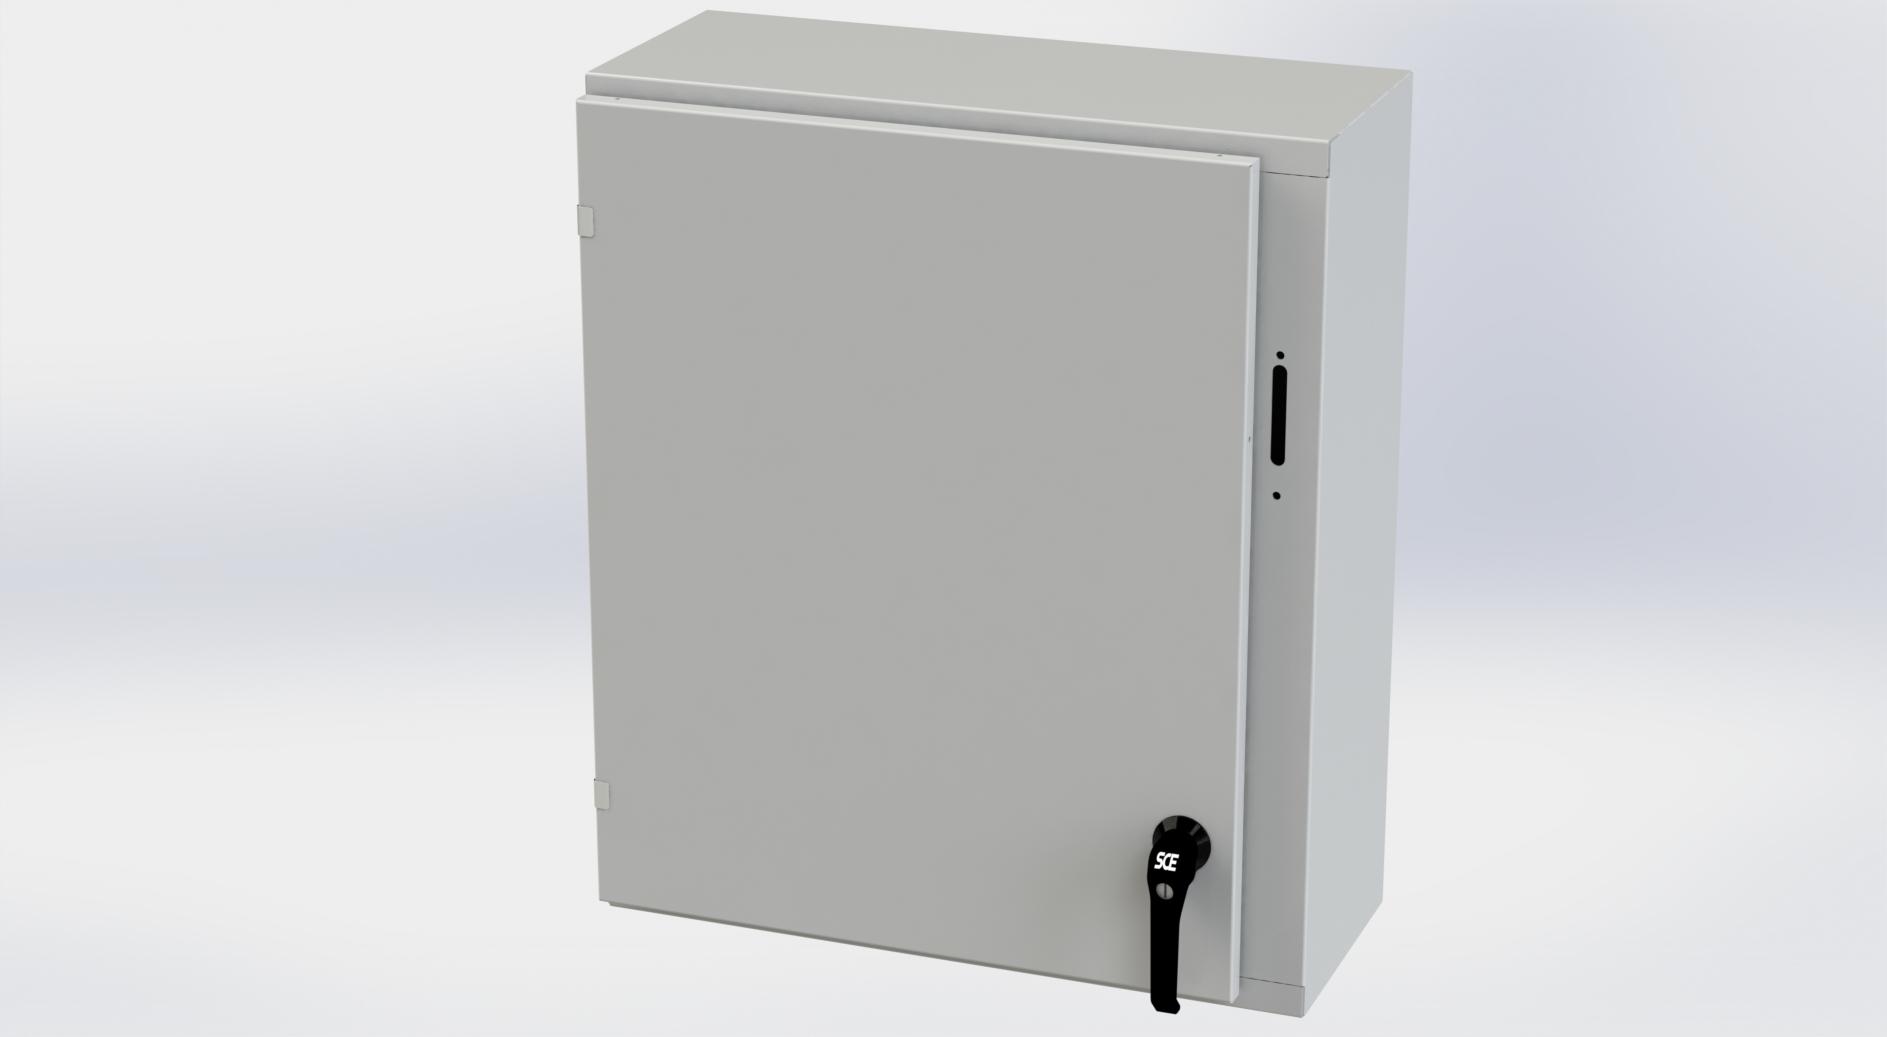 Saginaw Control SCE-30XEL2510LPLG XEL LP Enclosure, Height:30.00", Width:25.38", Depth:10.00", RAL 7035 gray powder coating inside and out. Optional sub-panels are powder coated white.